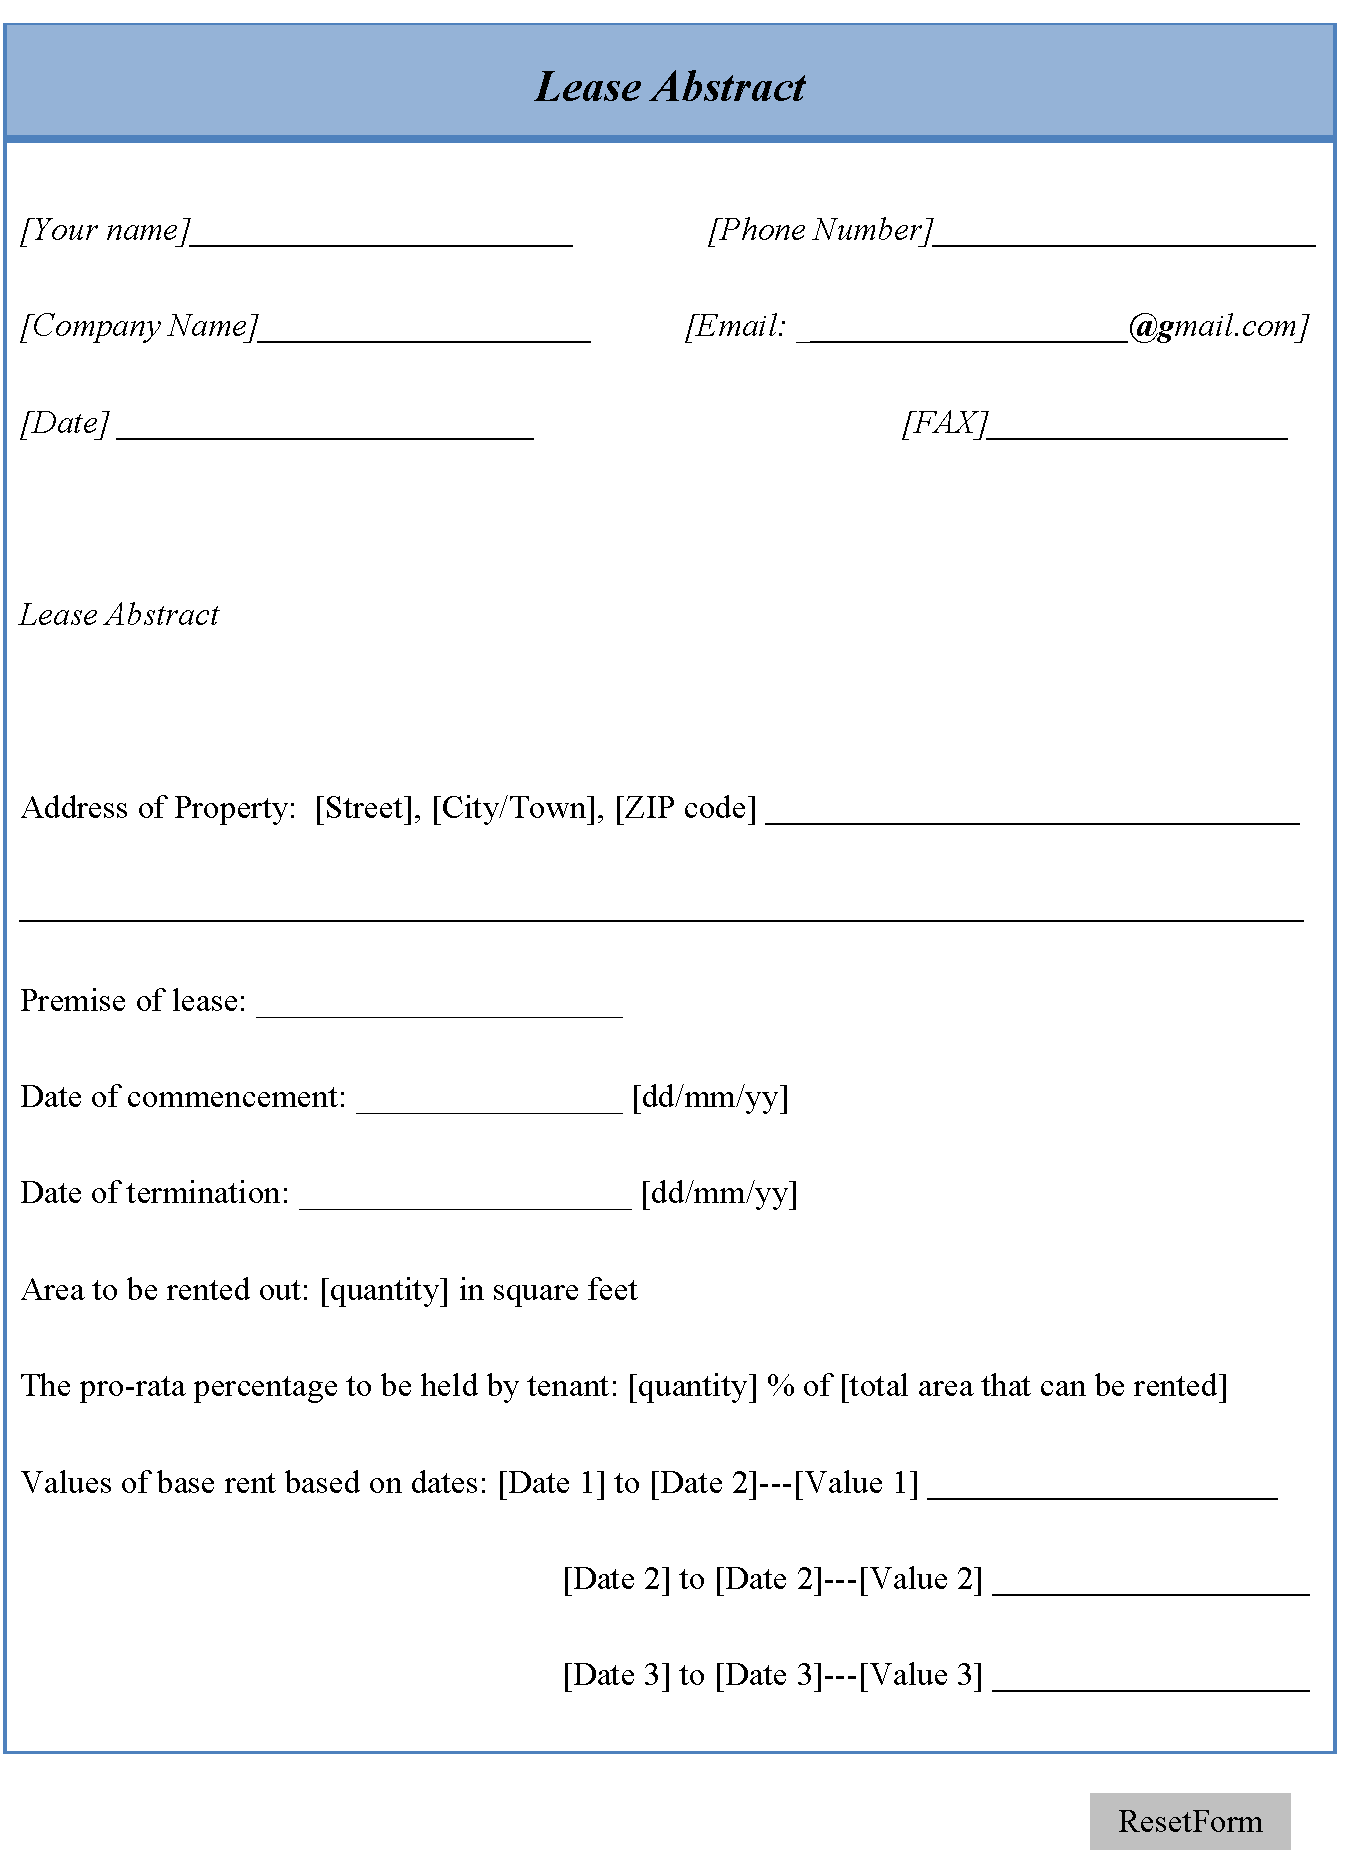 Lease Abstract Template Editable Forms